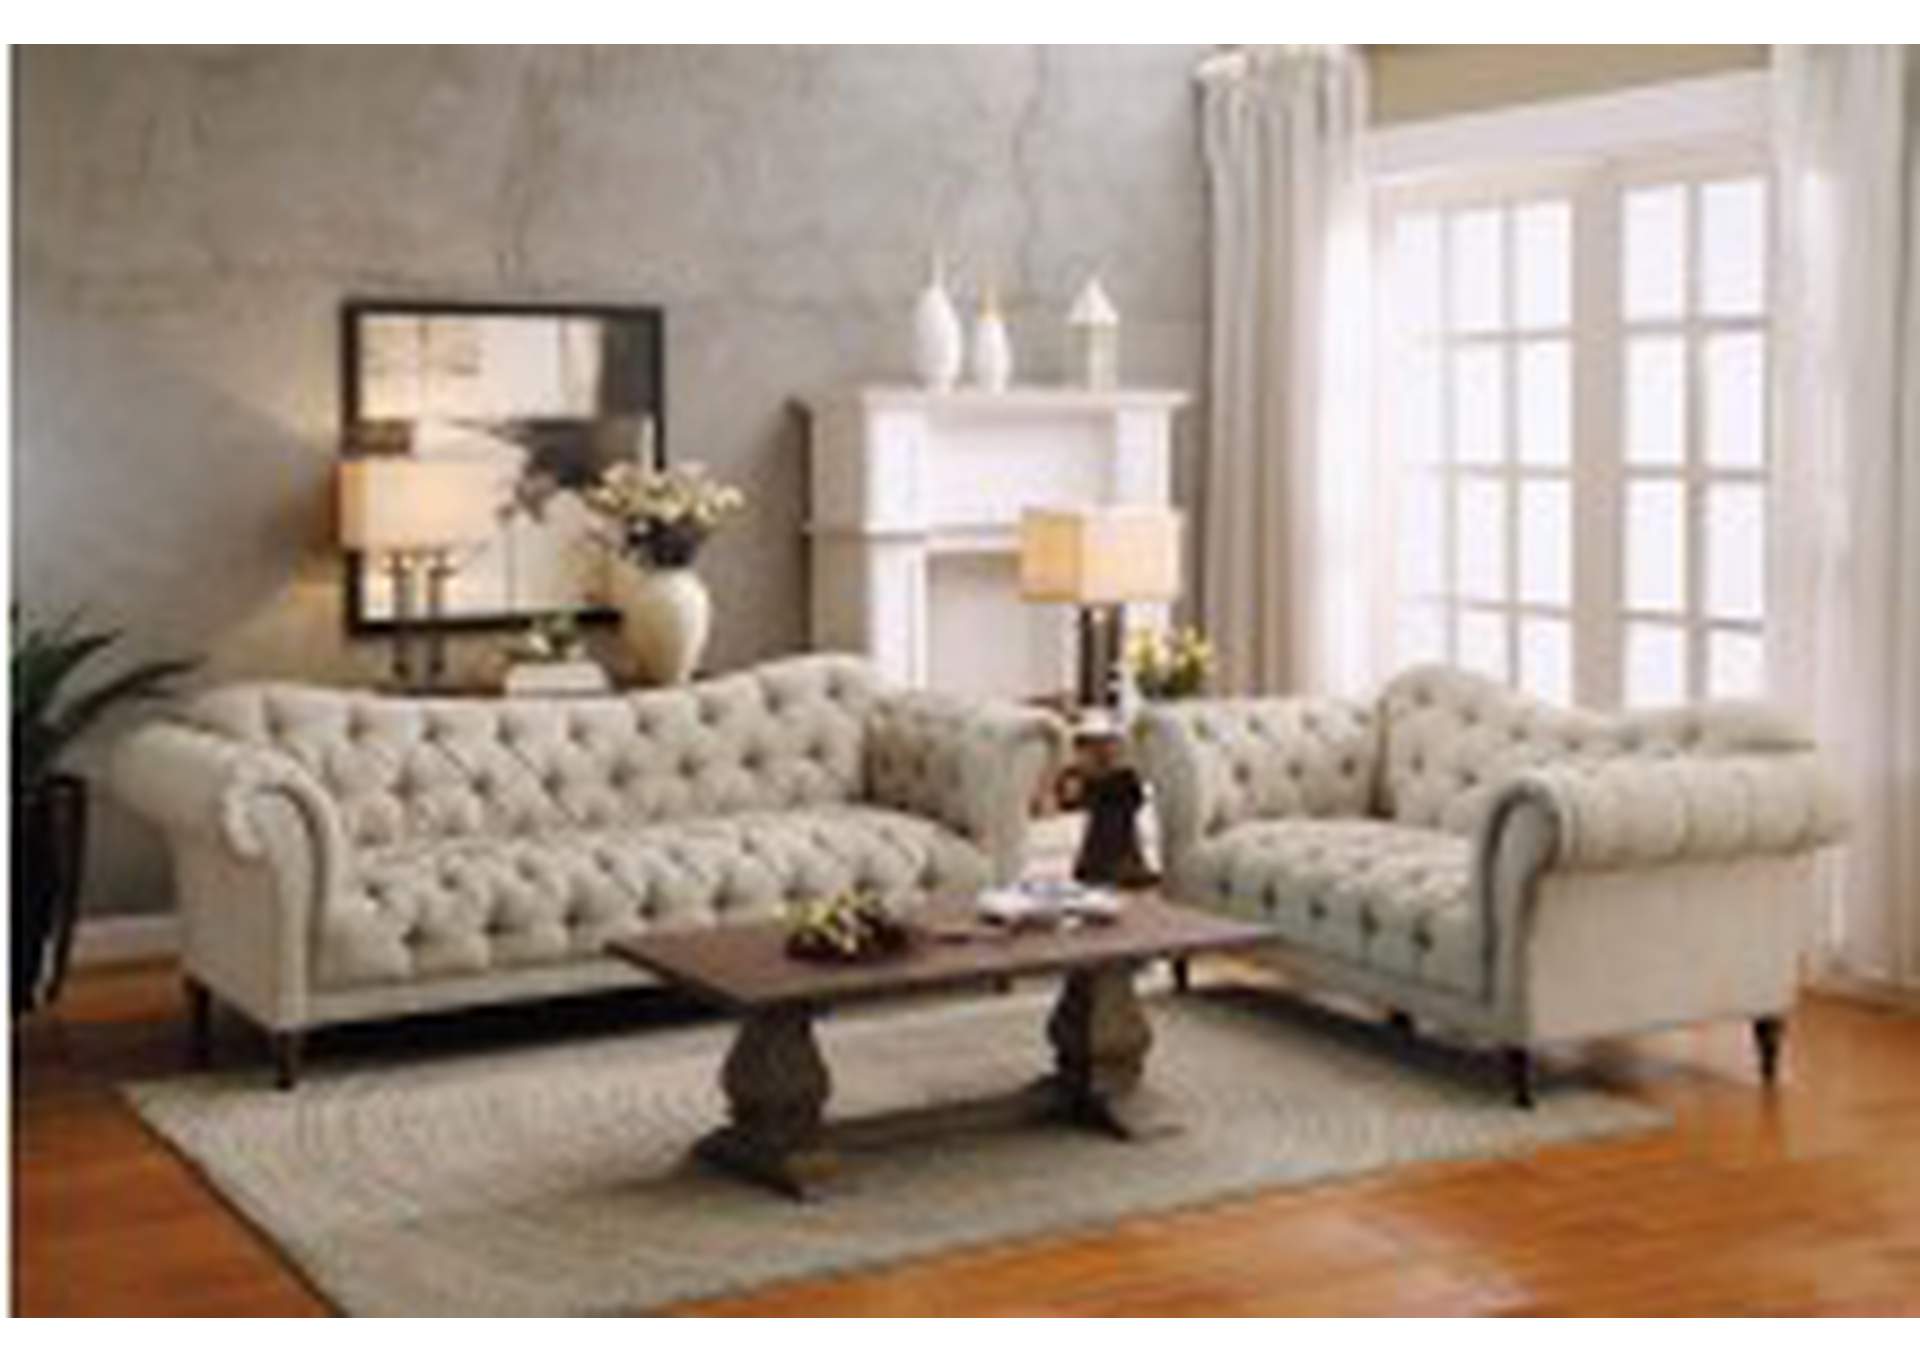 St. Claire Sofa,Homelegance